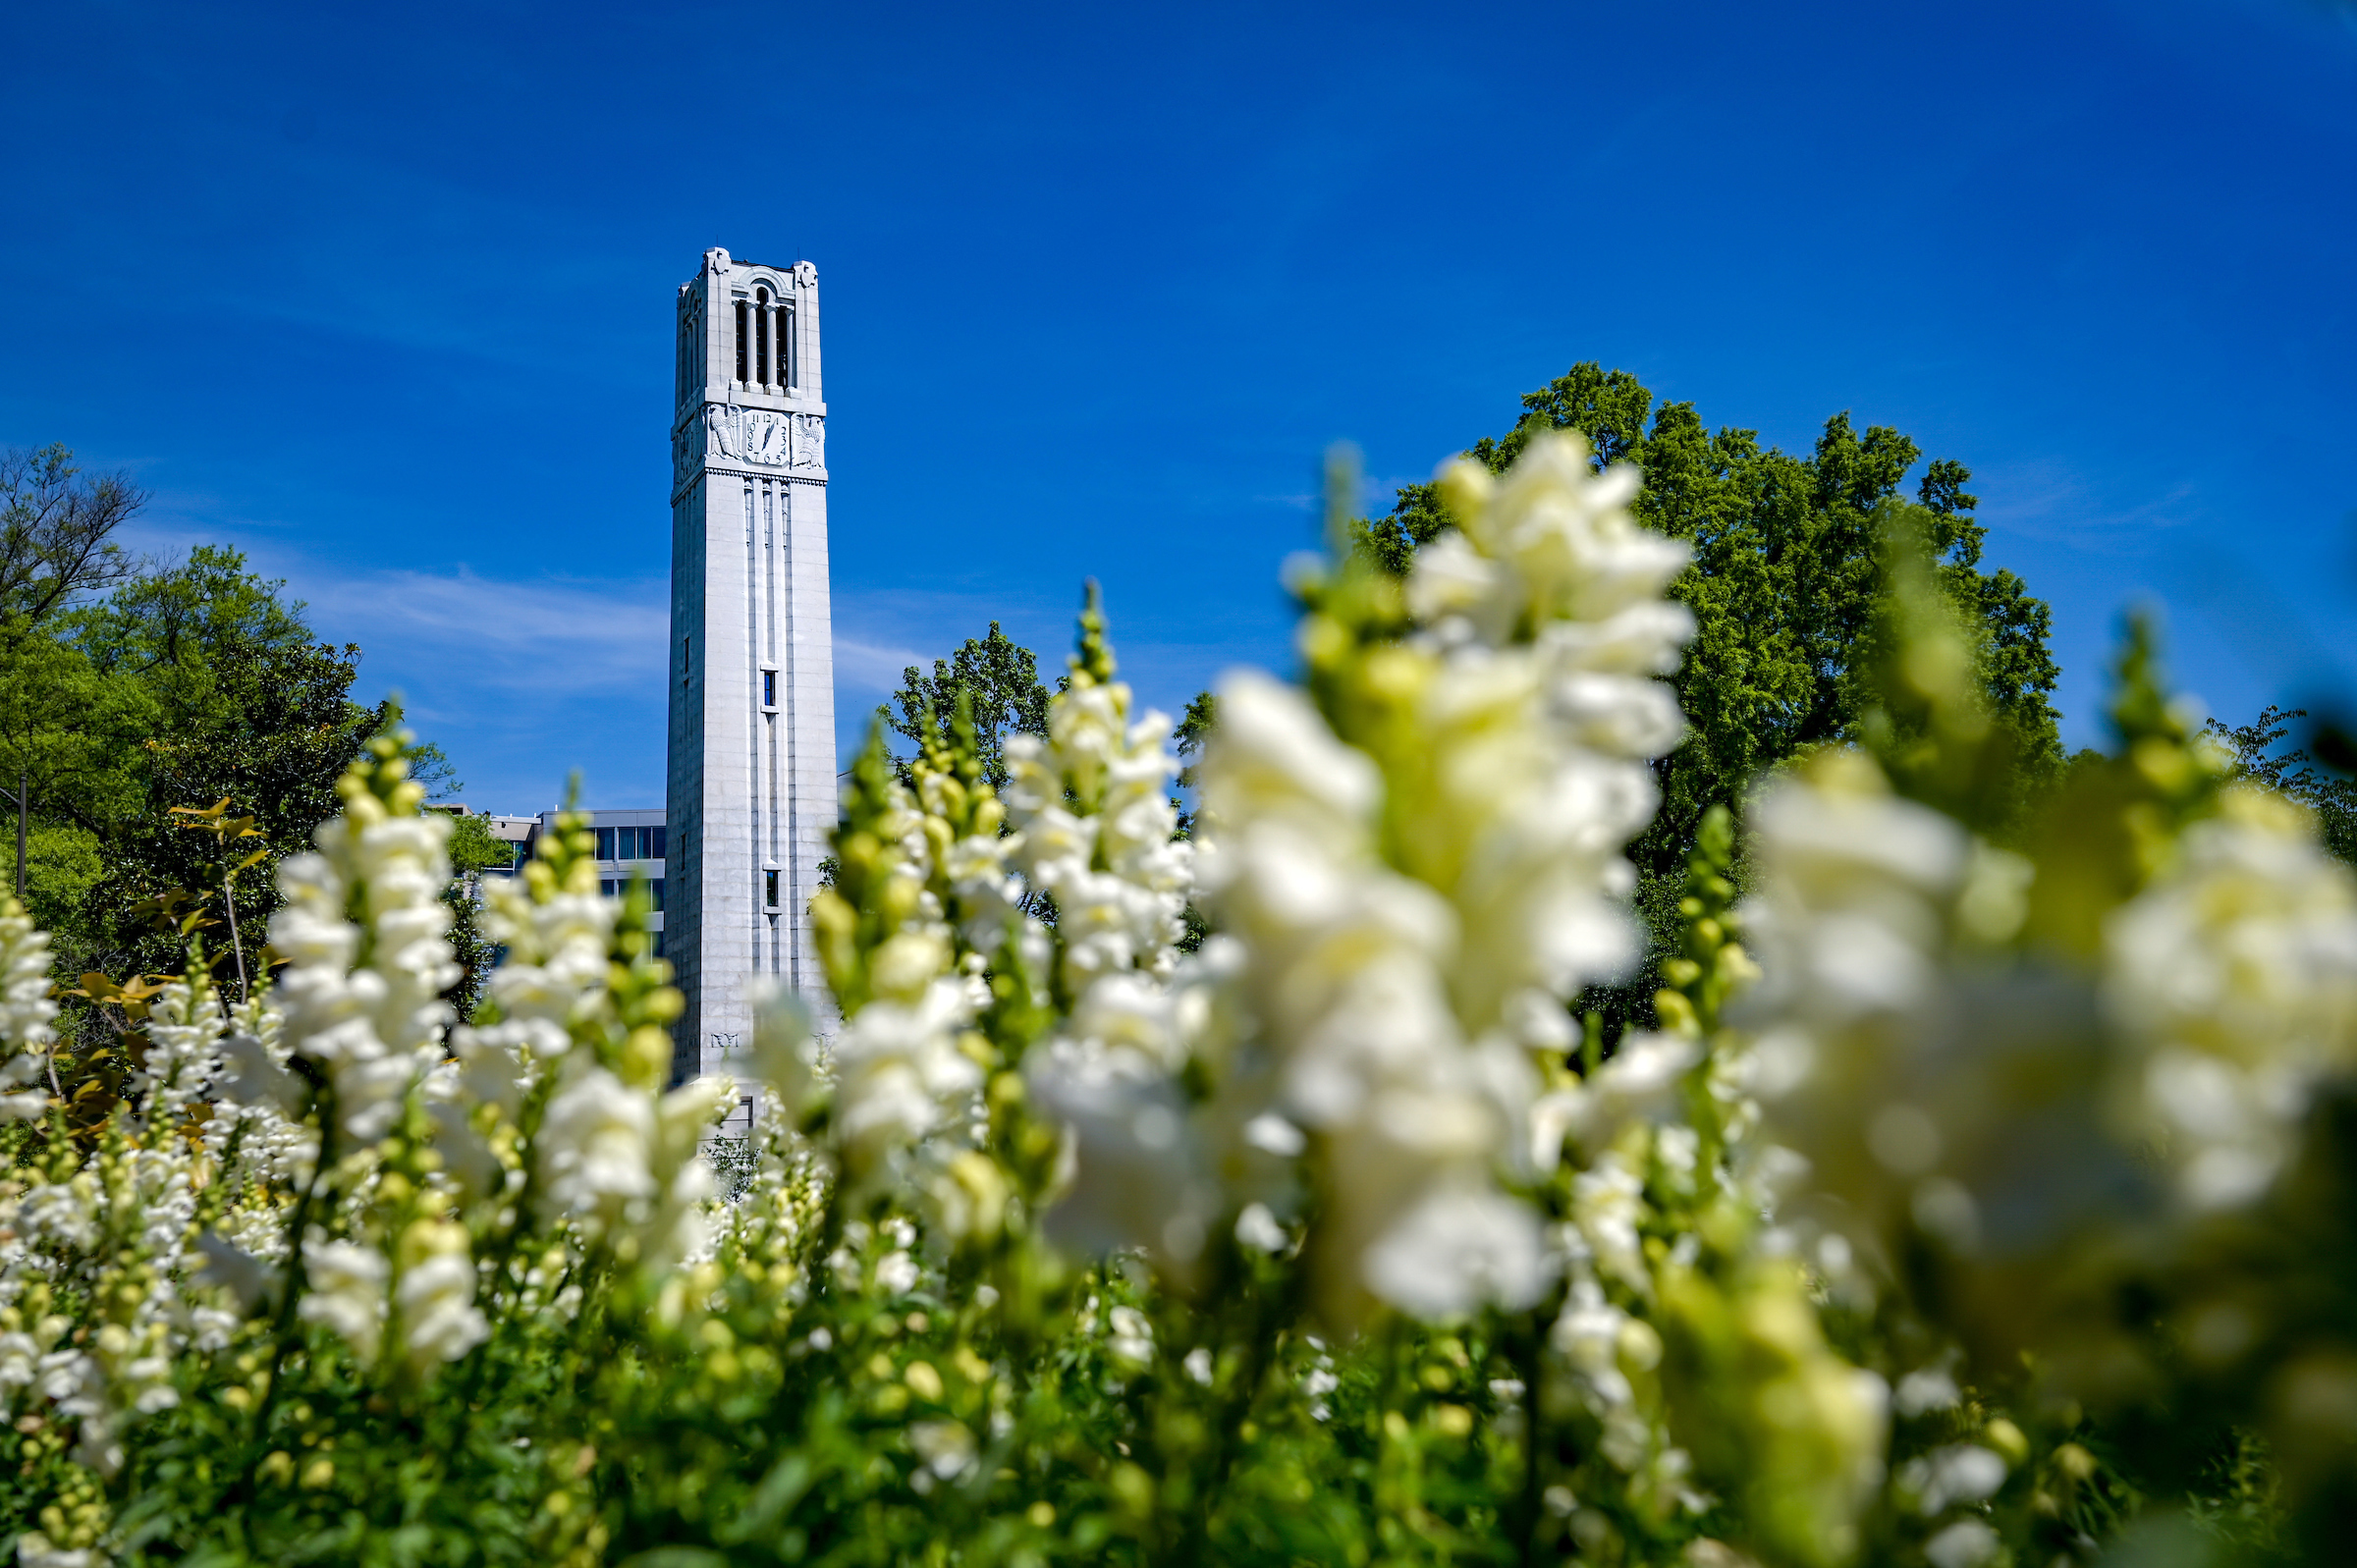 Spring flowers blooming in front of the belltower